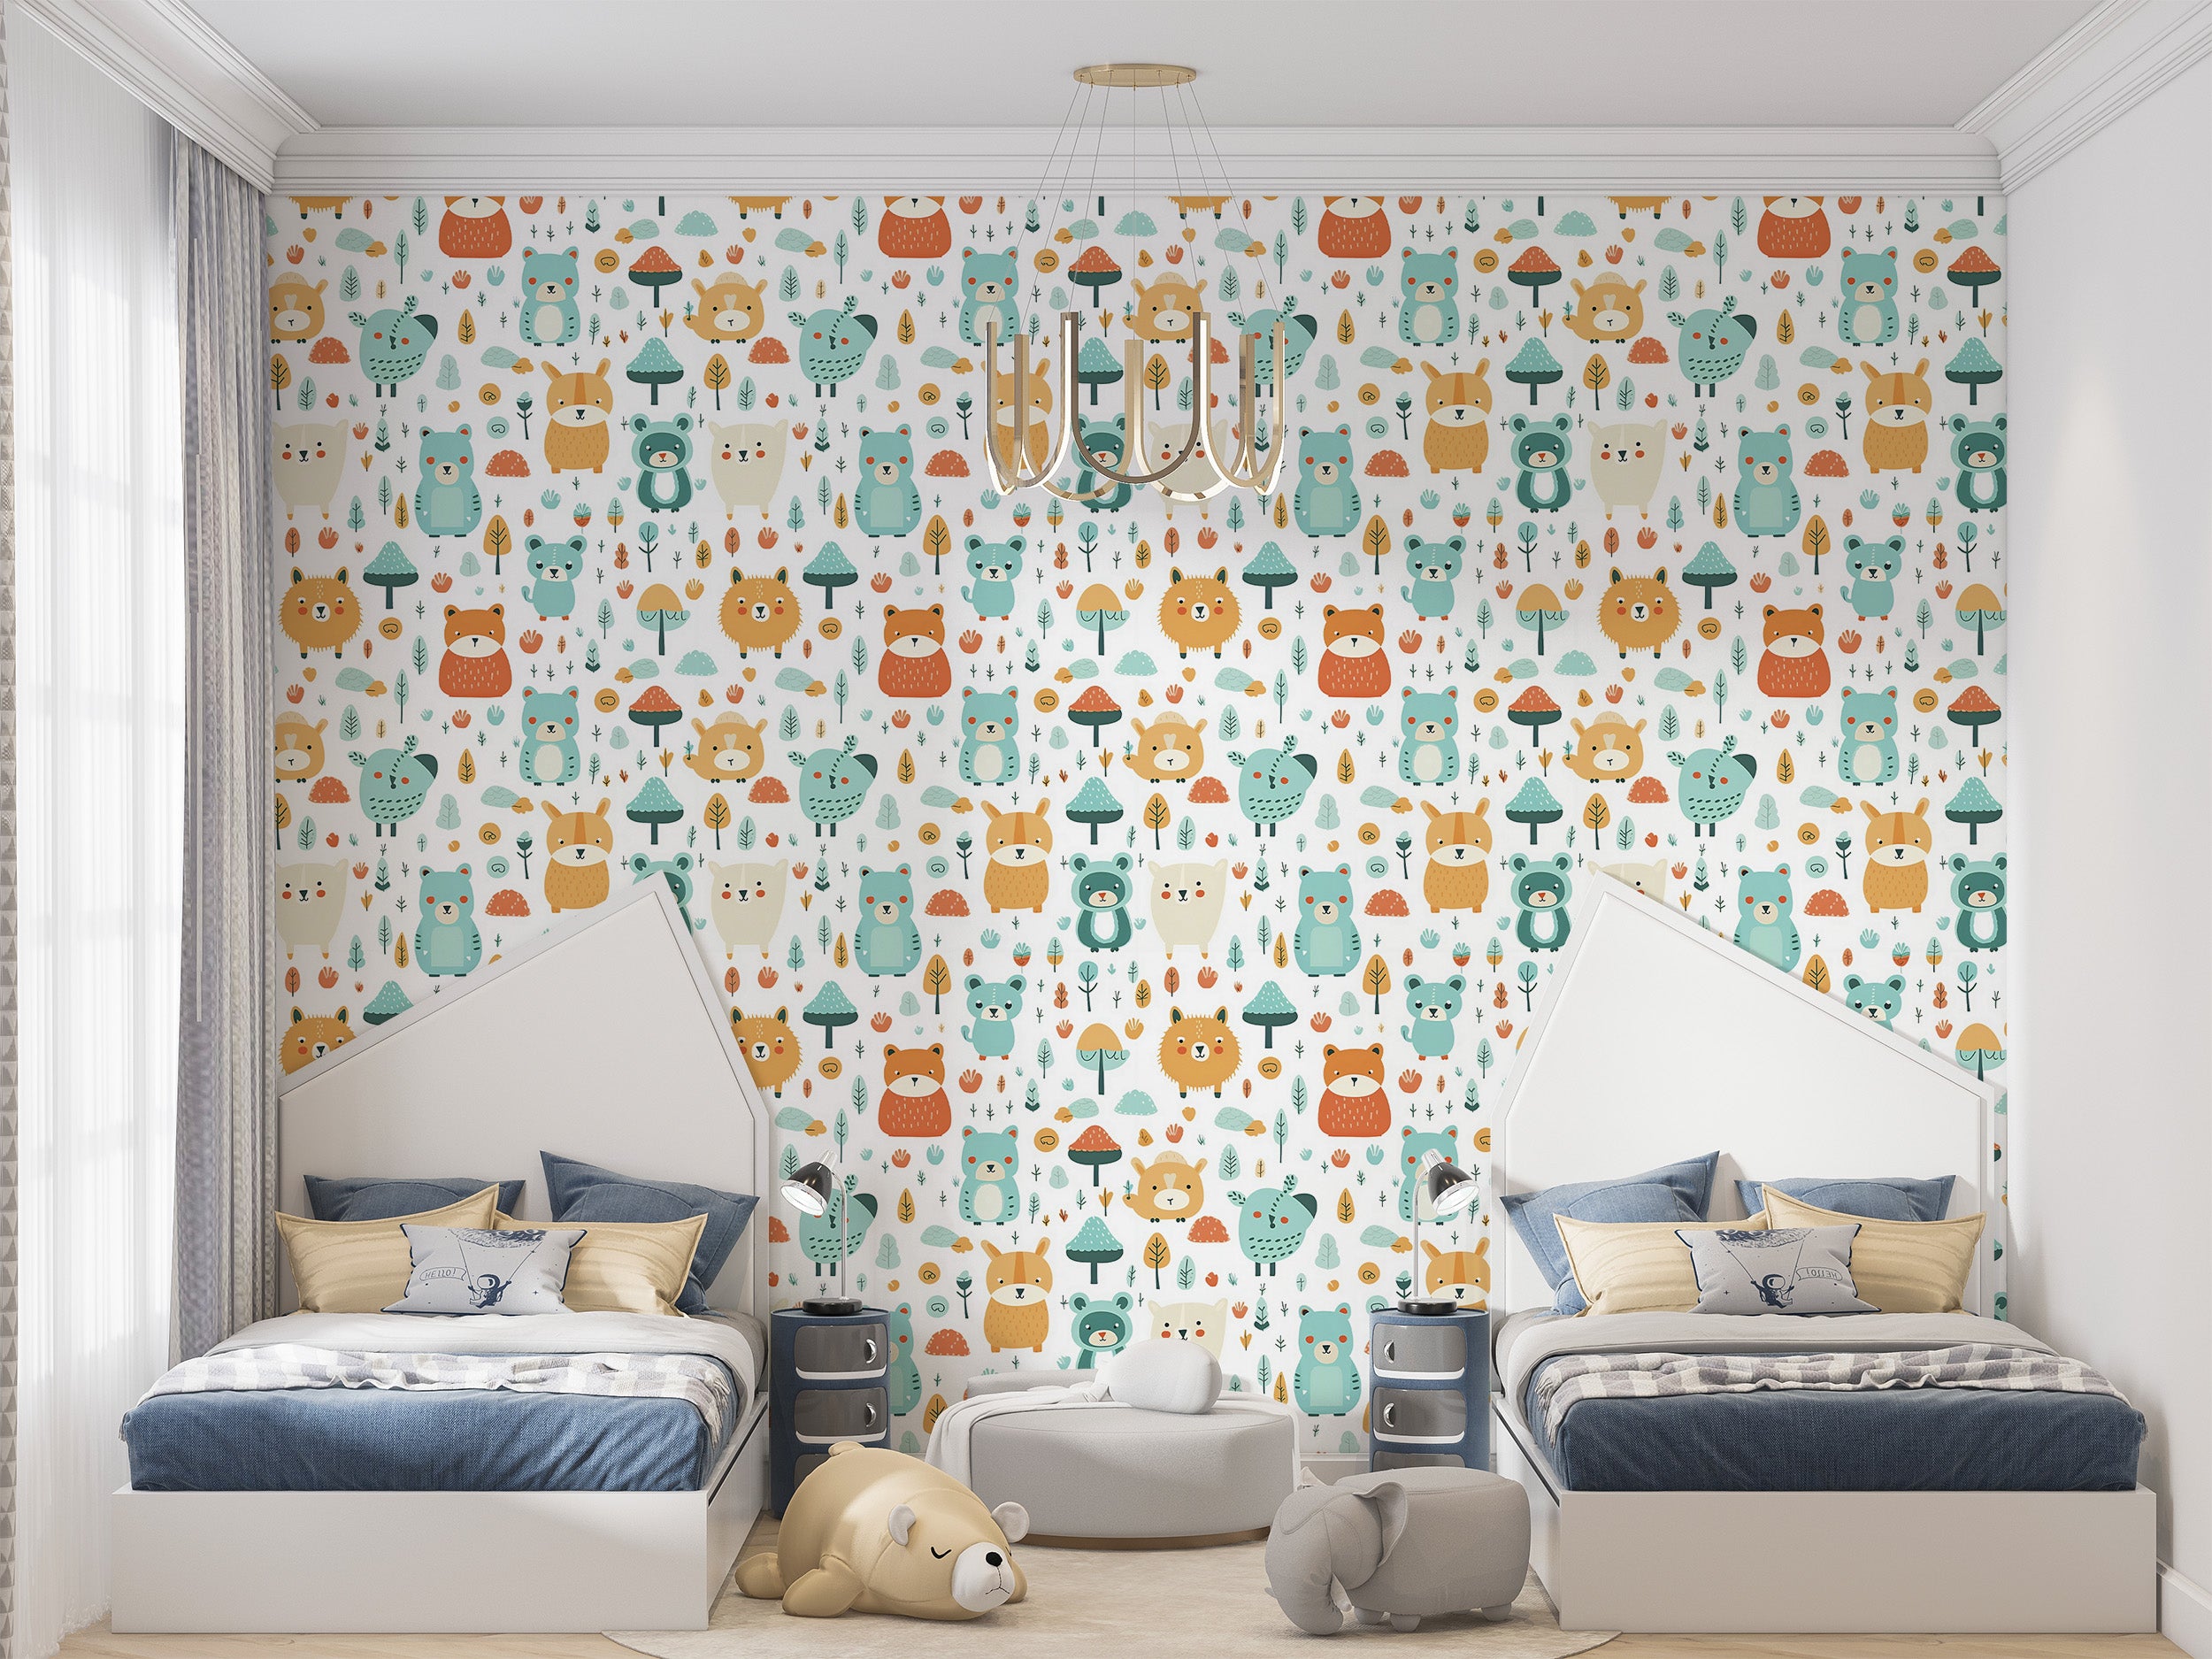 Create a Playful Ambiance with Cute Animals Wallpaper